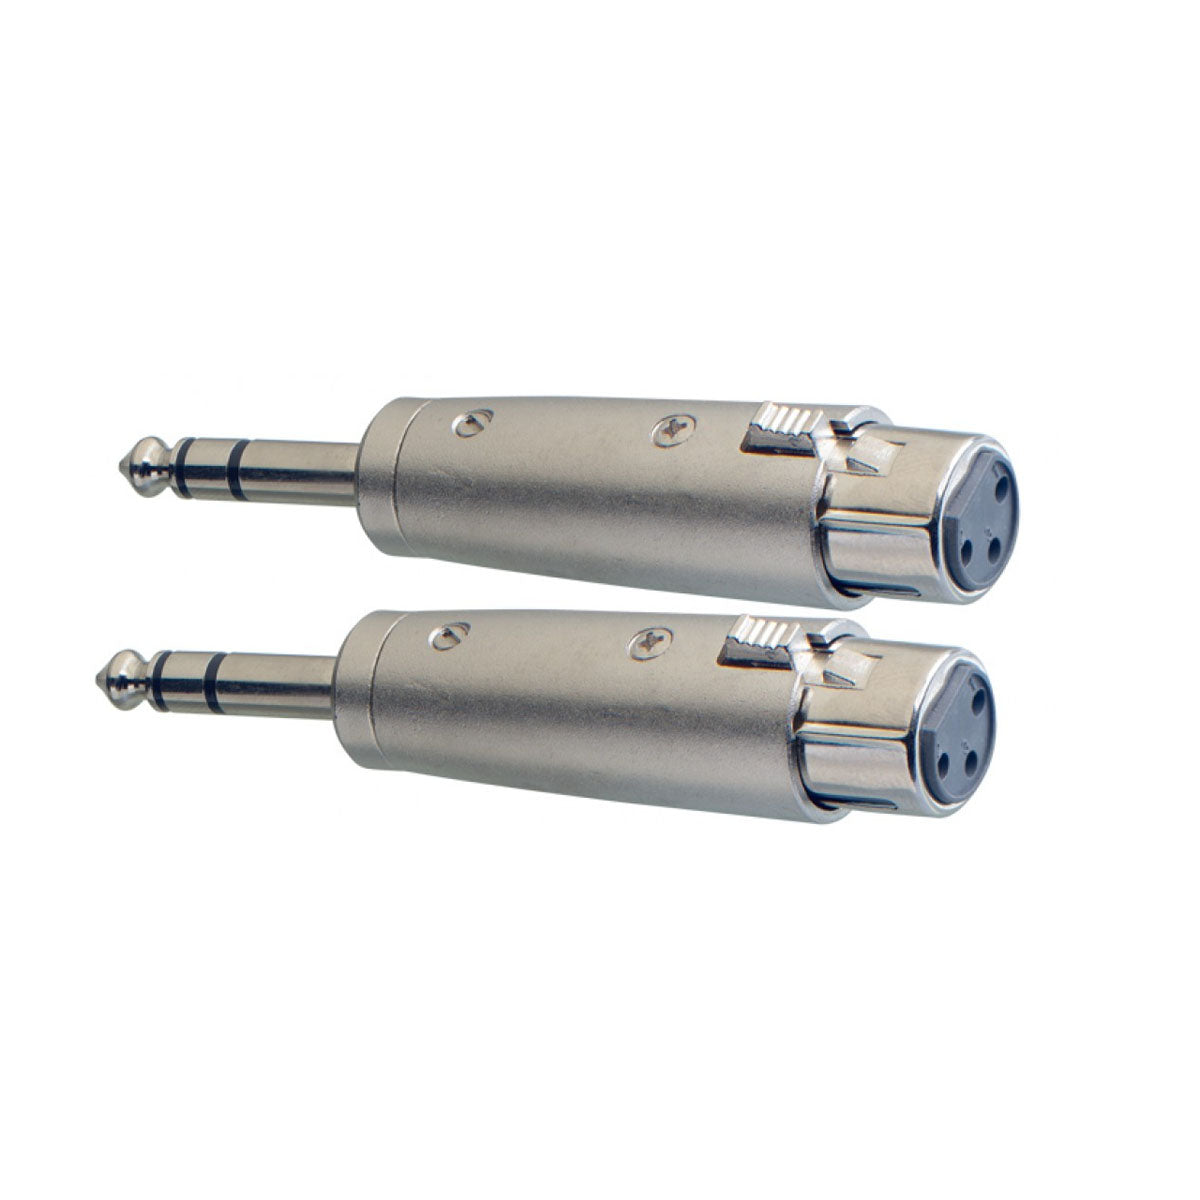 Stagg Audio Adapters -  Female XLR - Male Stereo 1/4" Jack (Pack of 2)